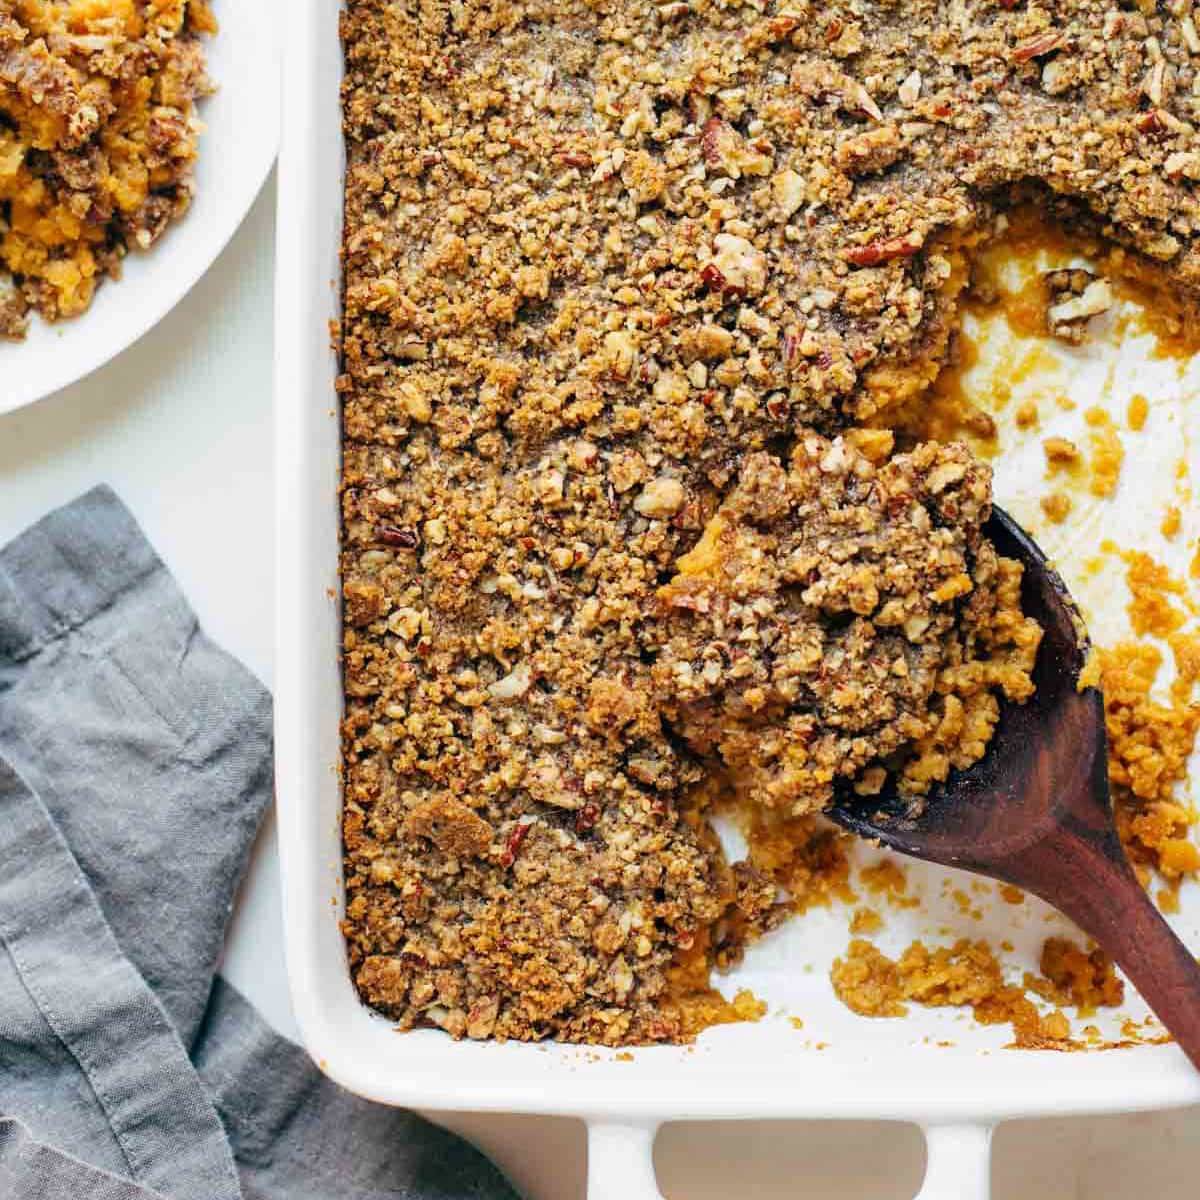 Sweet Potato Casserole With Brown Sugar Topping Recipe Pinch Of Yum,Rotel Dip Recipe With Ground Beef